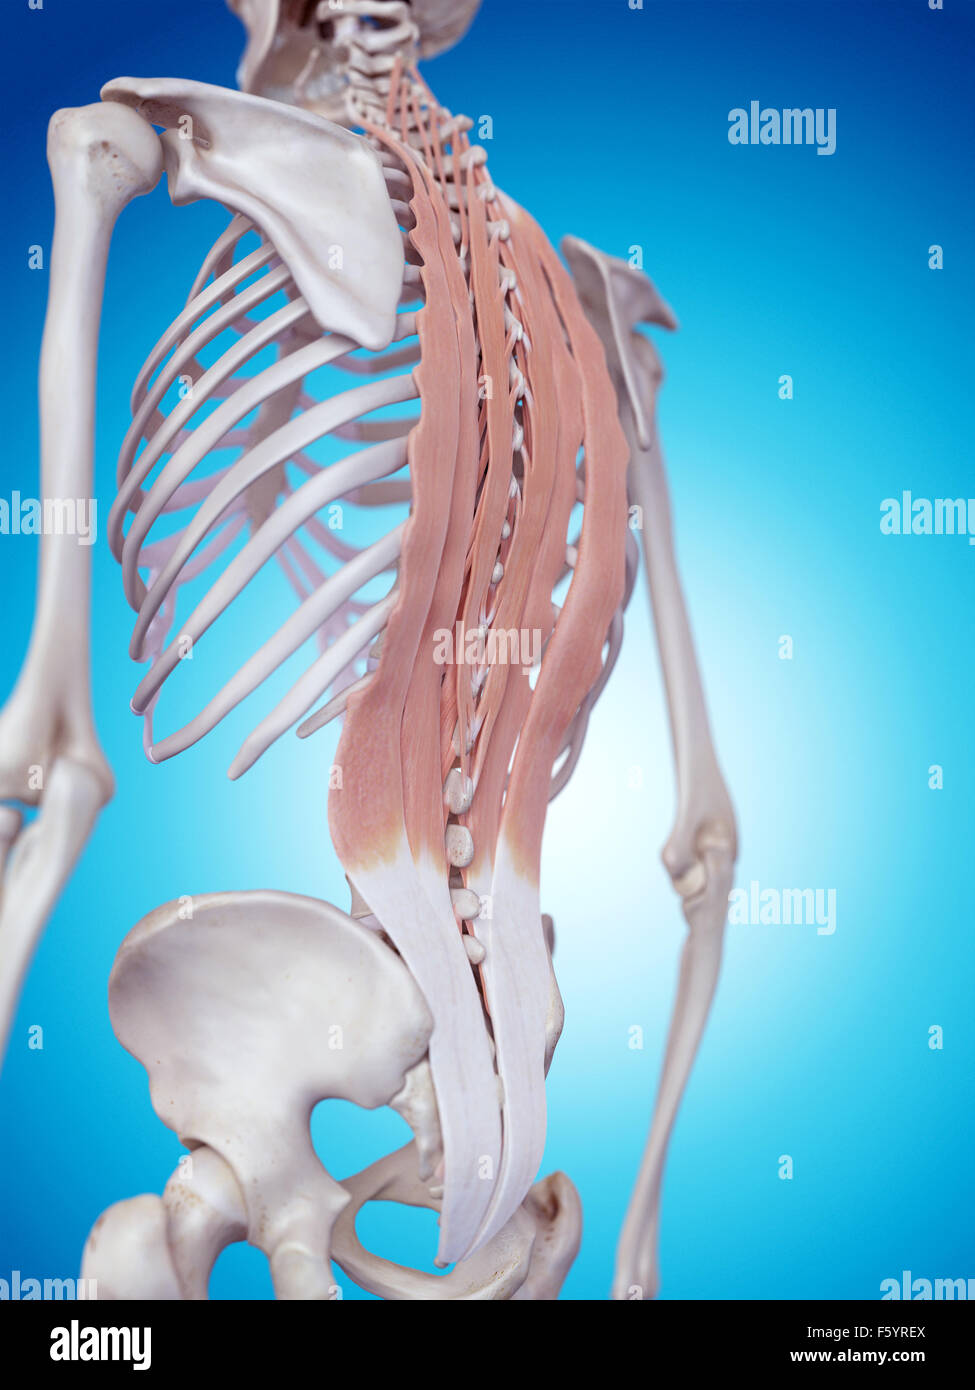 medically accurate illustration of the deep back muscles Stock Photo